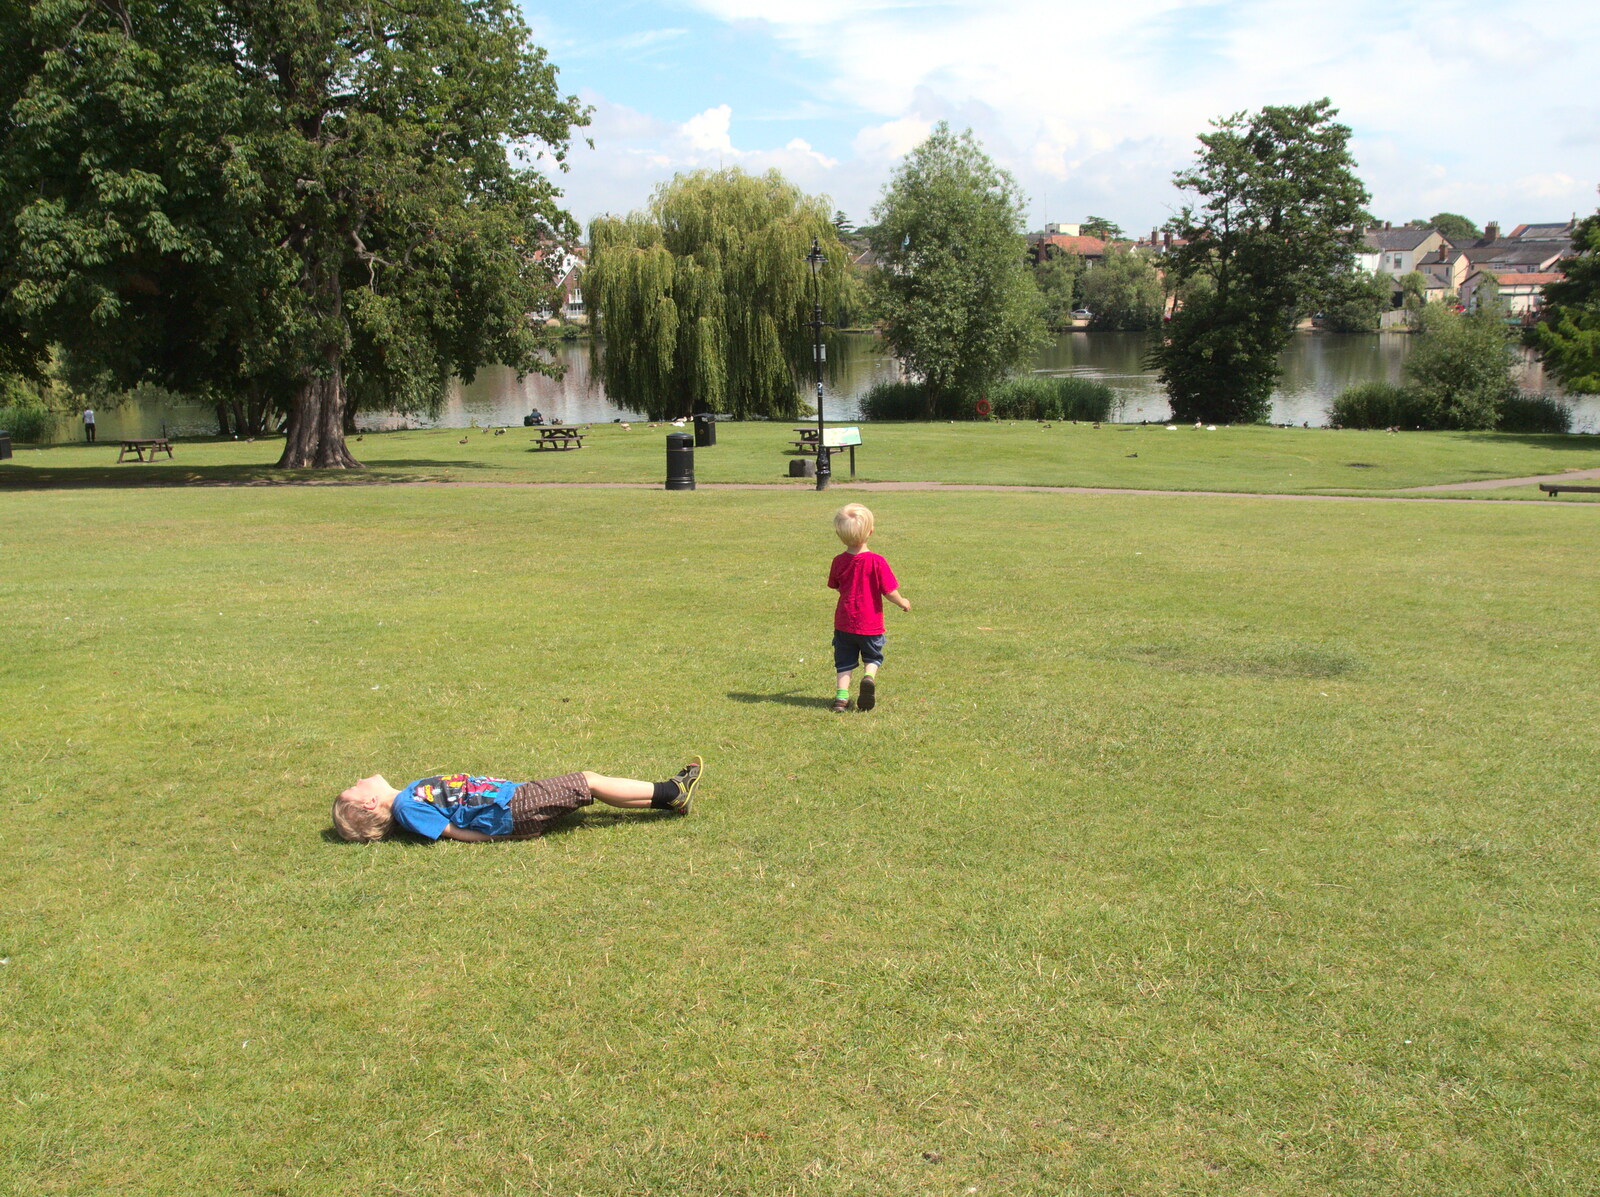 The boys in Diss Park from A Busy Day and a Church Fair, Diss, Norfolk - 28th June 2014